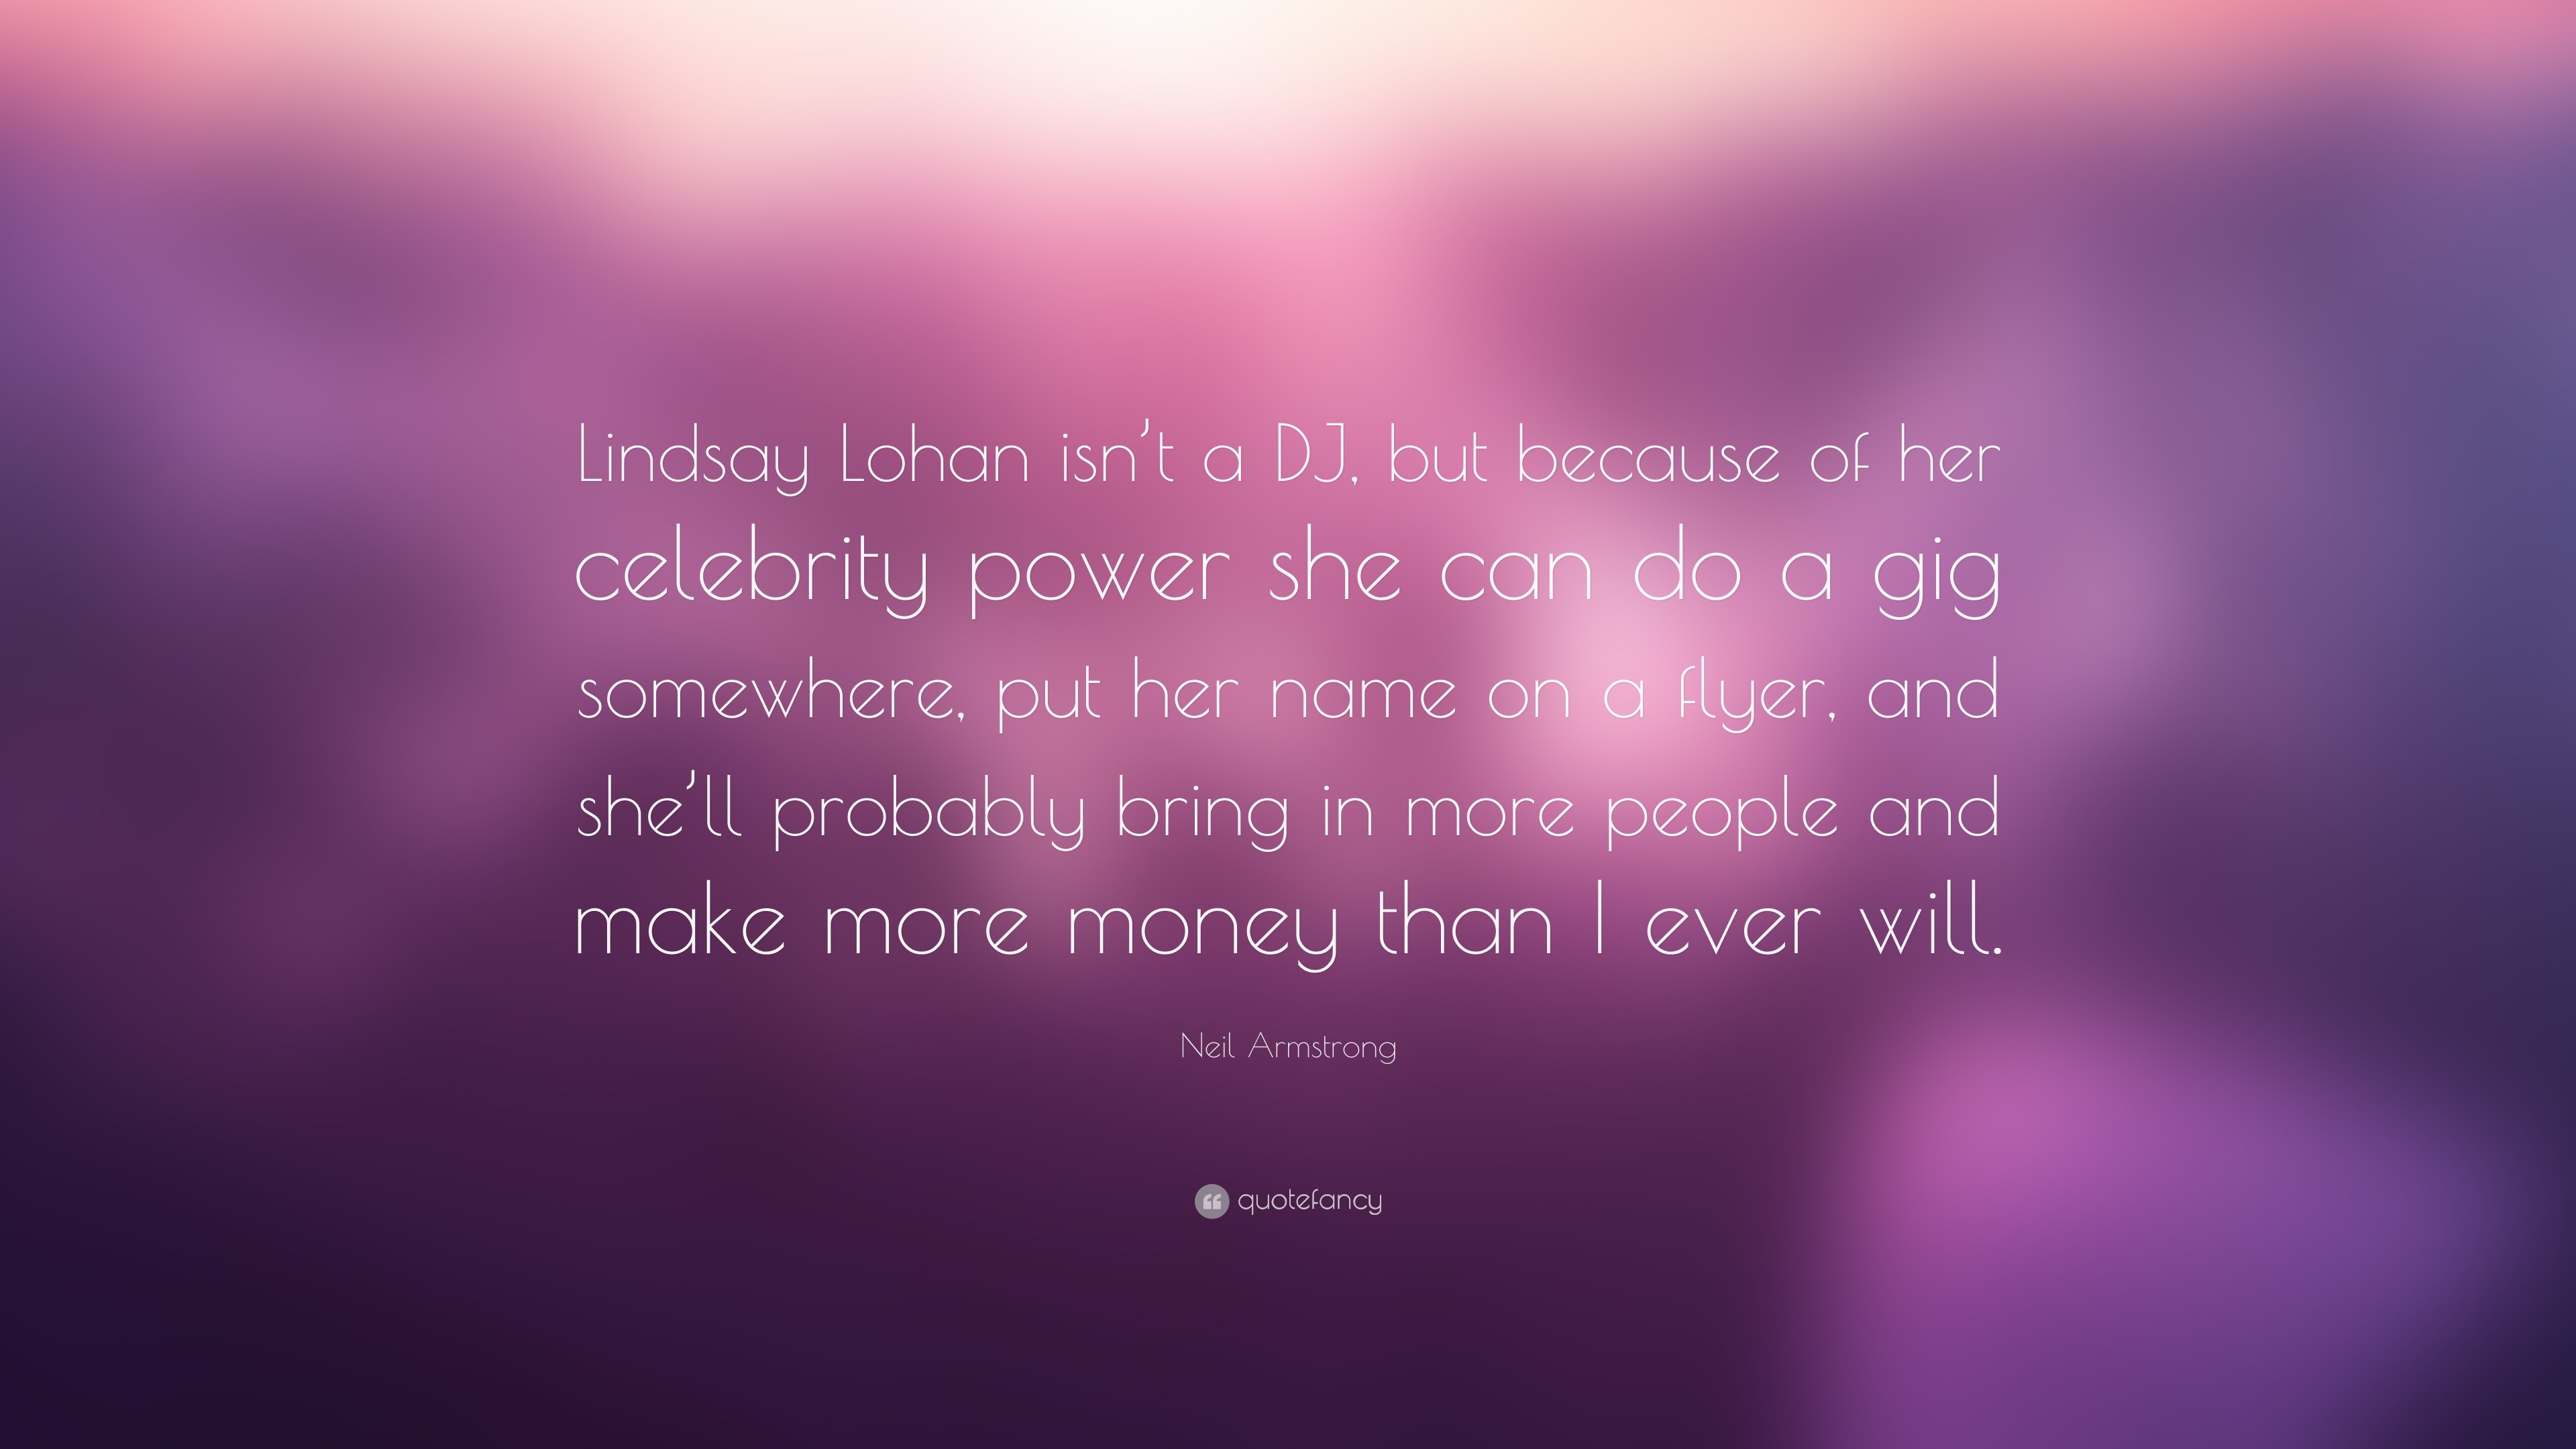 Neil Armstrong Quote: “Lindsay Lohan isn't a DJ, but because of her  celebrity power she can do a gig somewhere, put her name on a flyer, and  sh...”